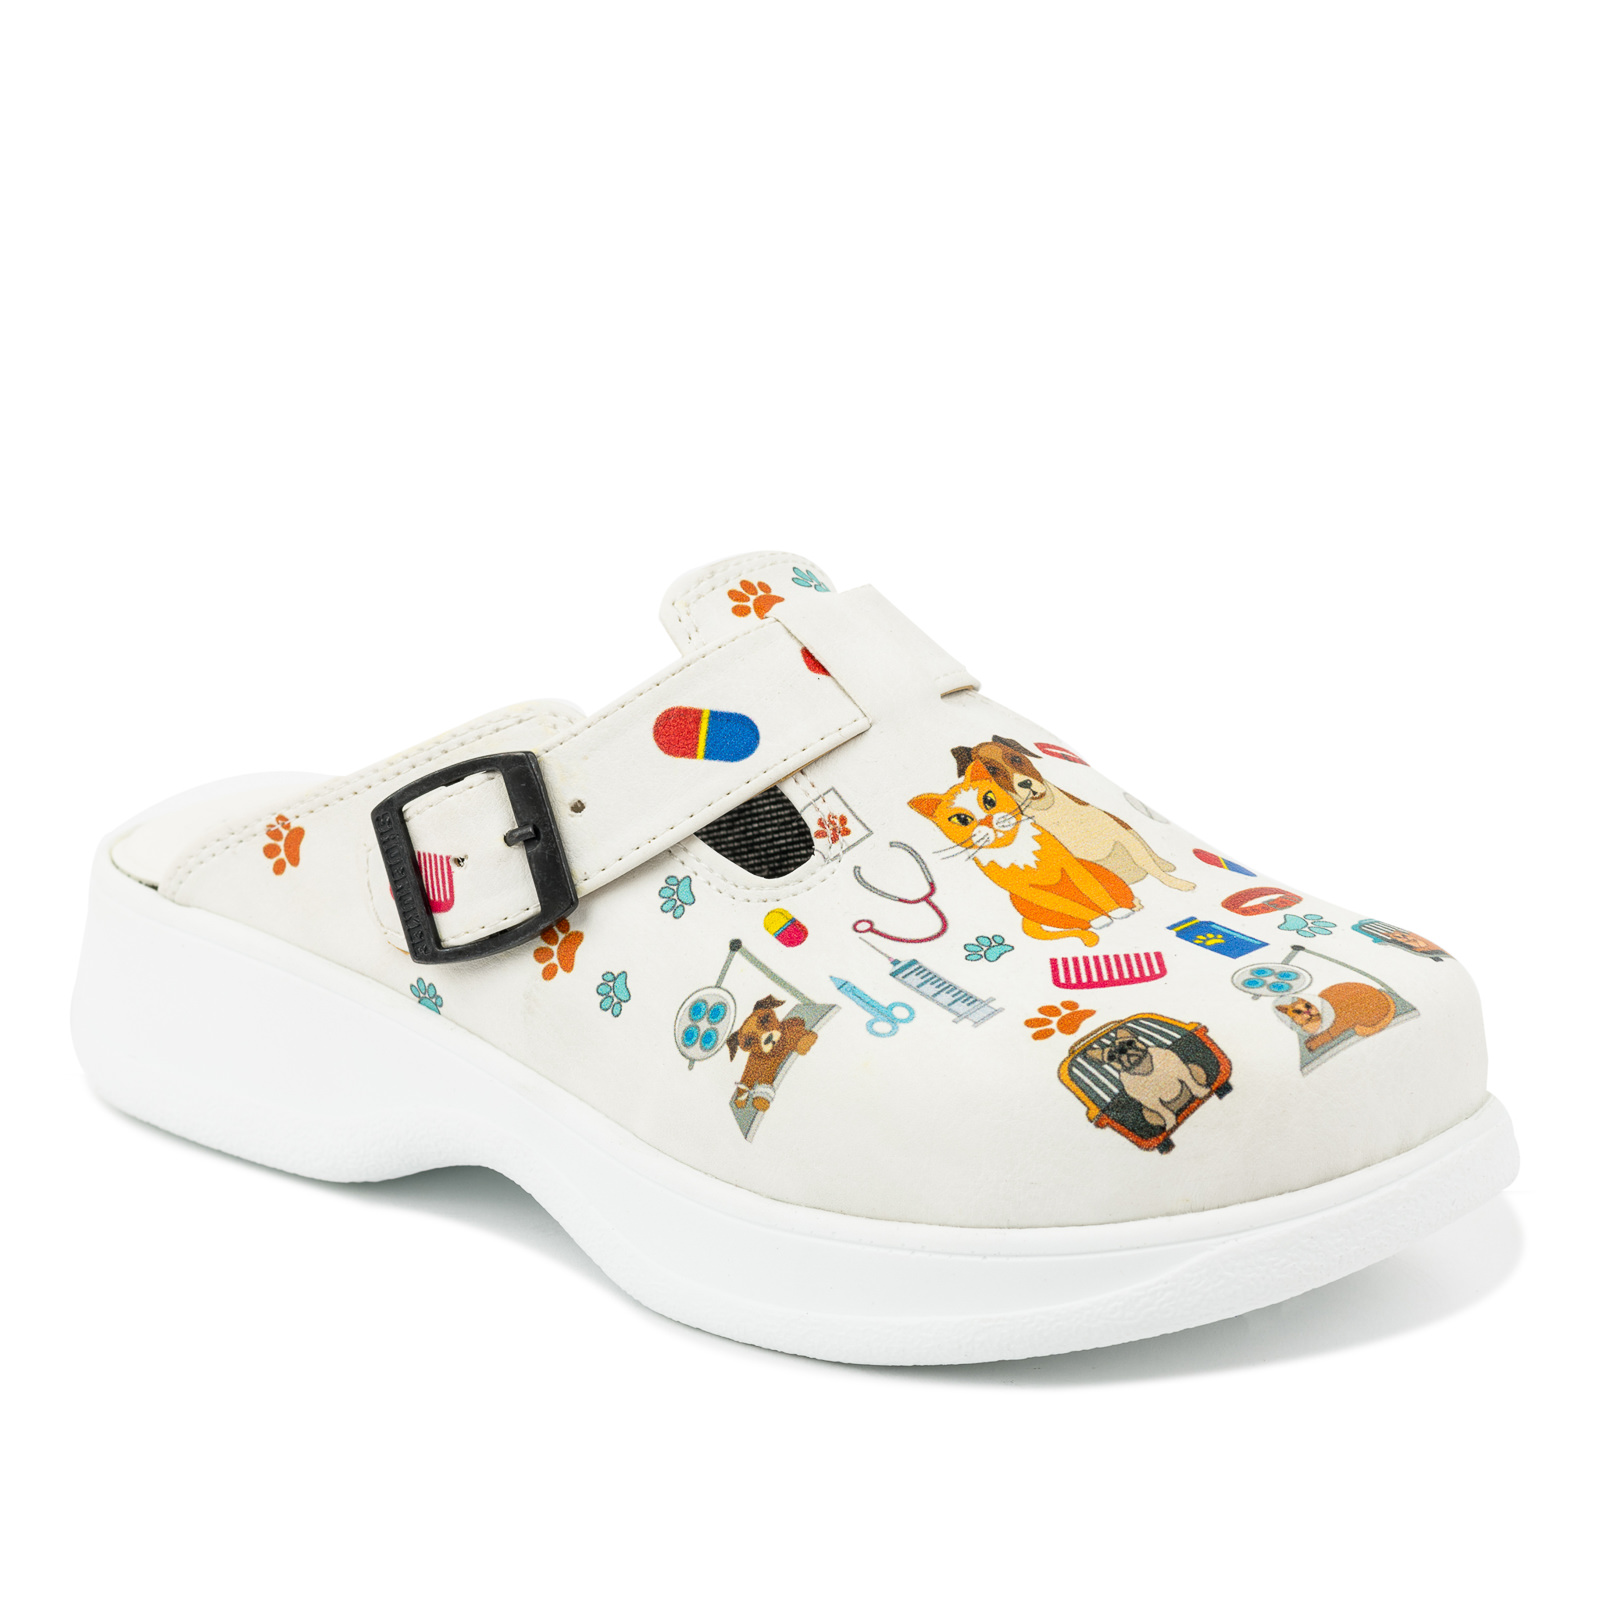 Patterned women clogs A031 VETERINARY - WHITE